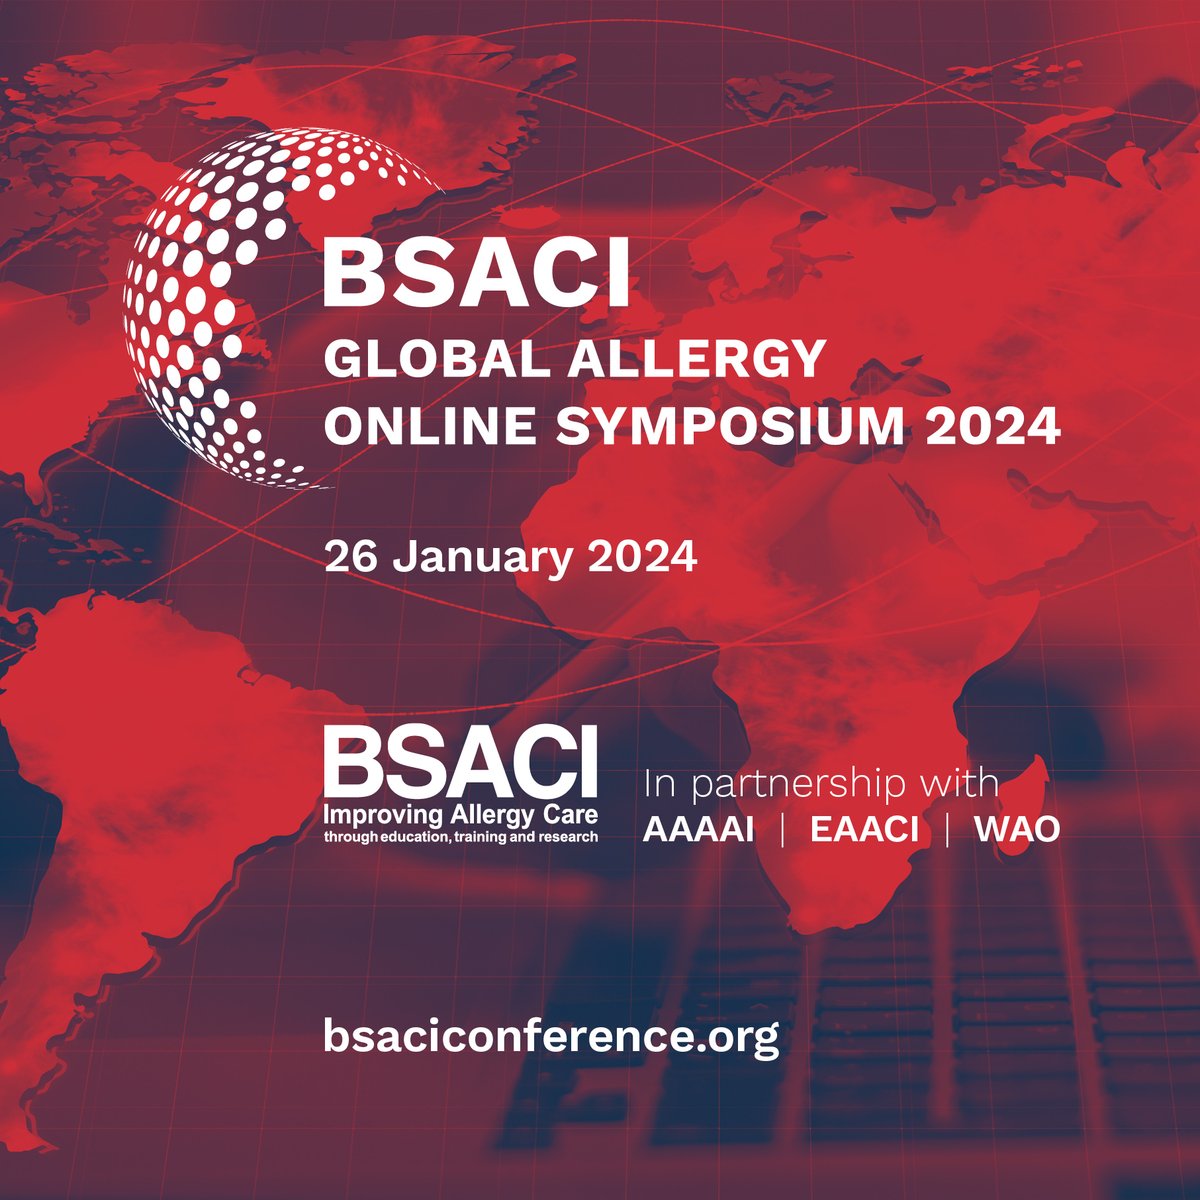 #BSACISOTA24: earn 6 CPD points when you attend. If you haven’t yet registered for the online symposium on Friday 26th January 2024 at 08:00 – 18:20 GMT register now at bsaciconference.org. @BSACI_Allergy in partnership with @worldallergy, @AAAAI_org and @EAACI_HQ